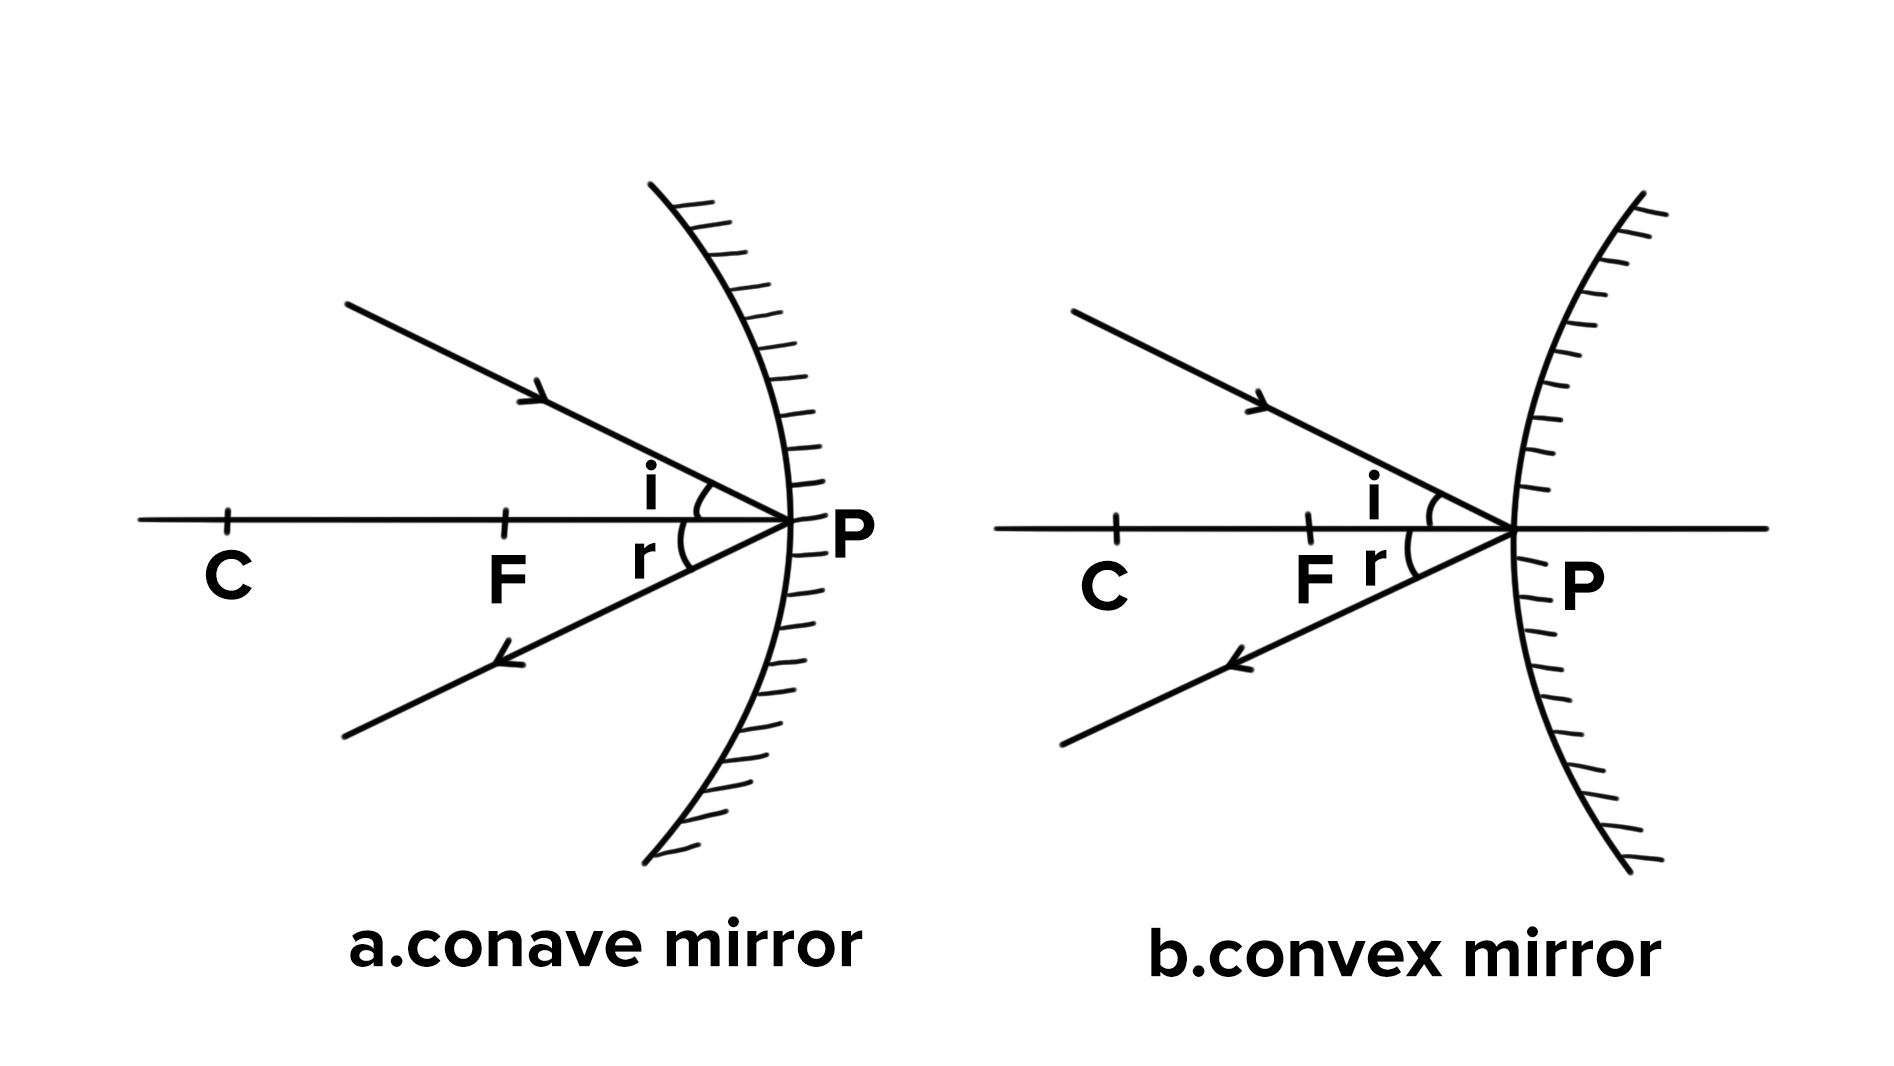 Rules for drawing ray diagrams for spherical mirrors